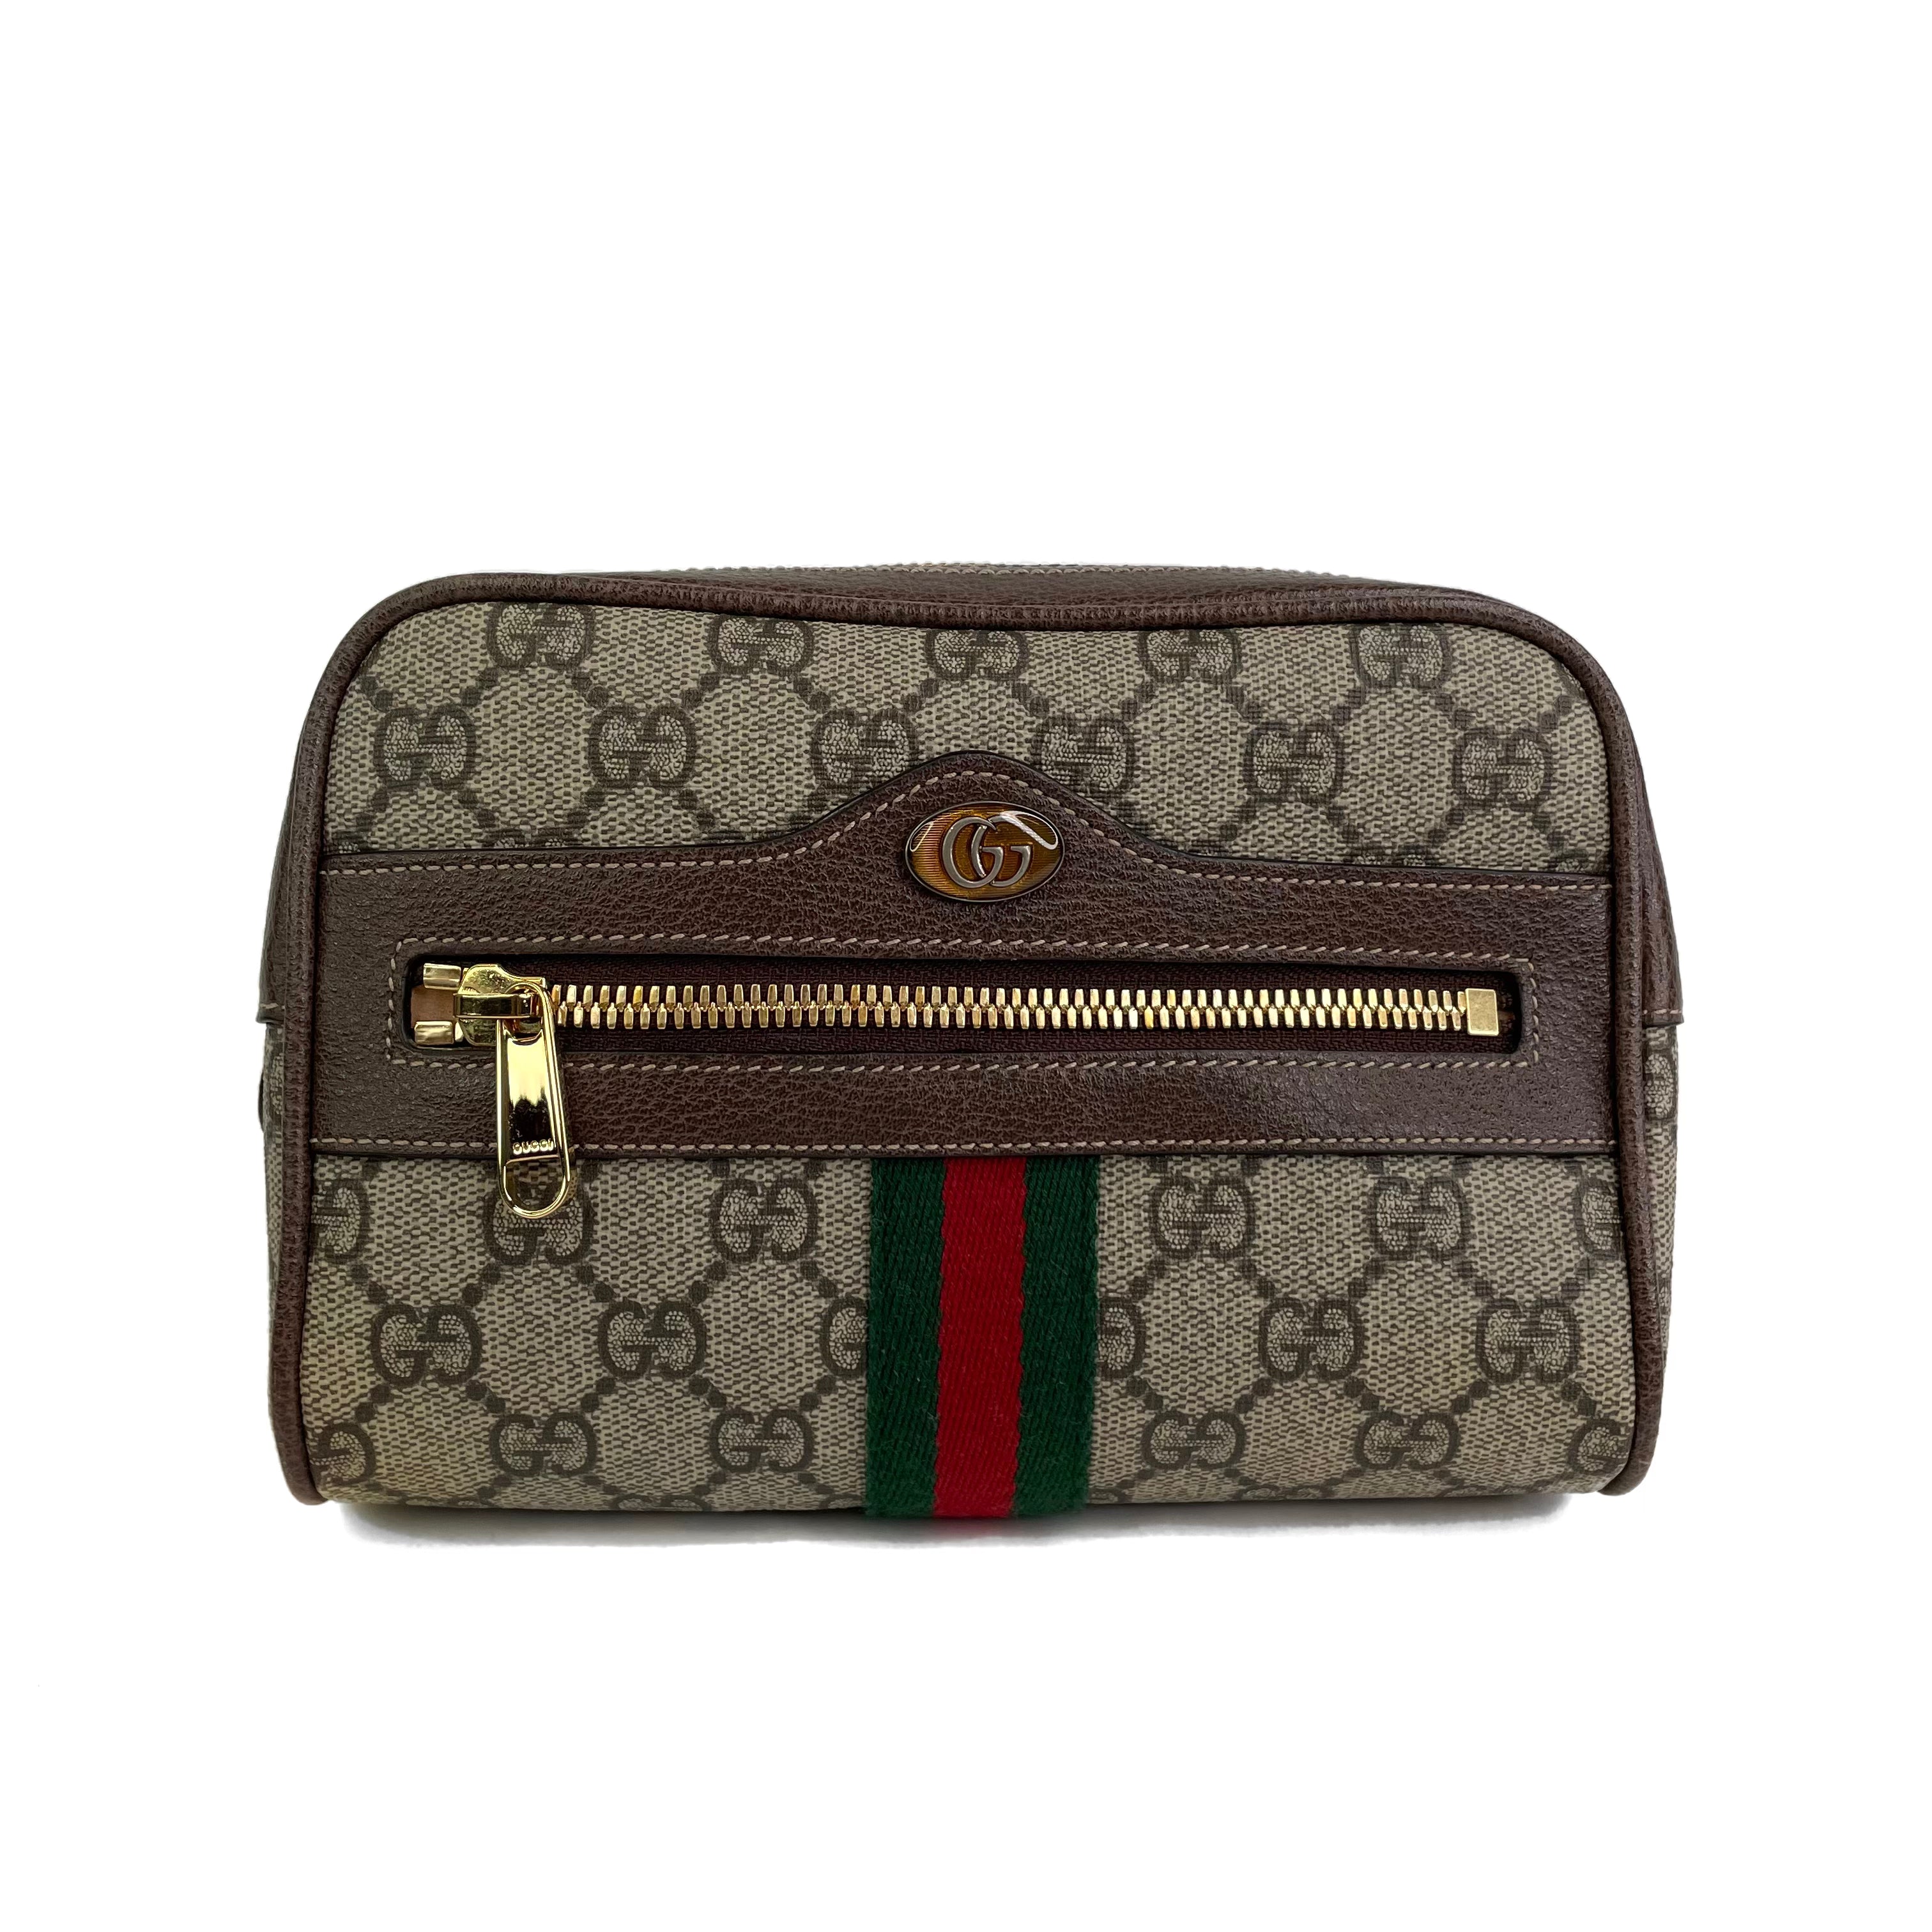 Gucci GG Supreme Ophidia Small Belt Bag - Size 34 / 85 (SHF-aXoika) – LuxeDH